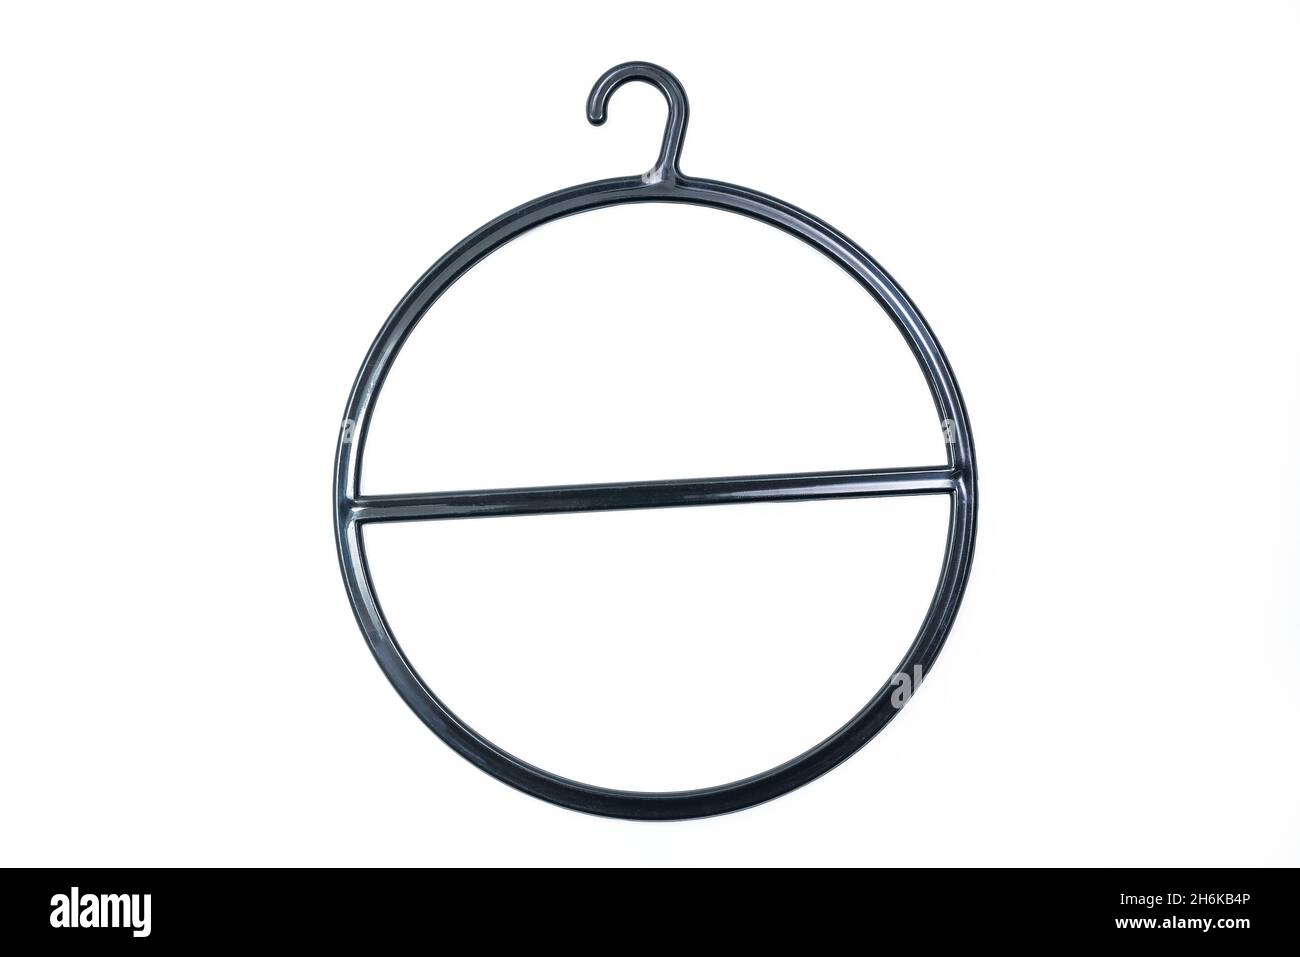 Black Round circular hanger isolated over white background with clipping path included. Plastic hanger for ties, scarves, jewelry Stock Photo